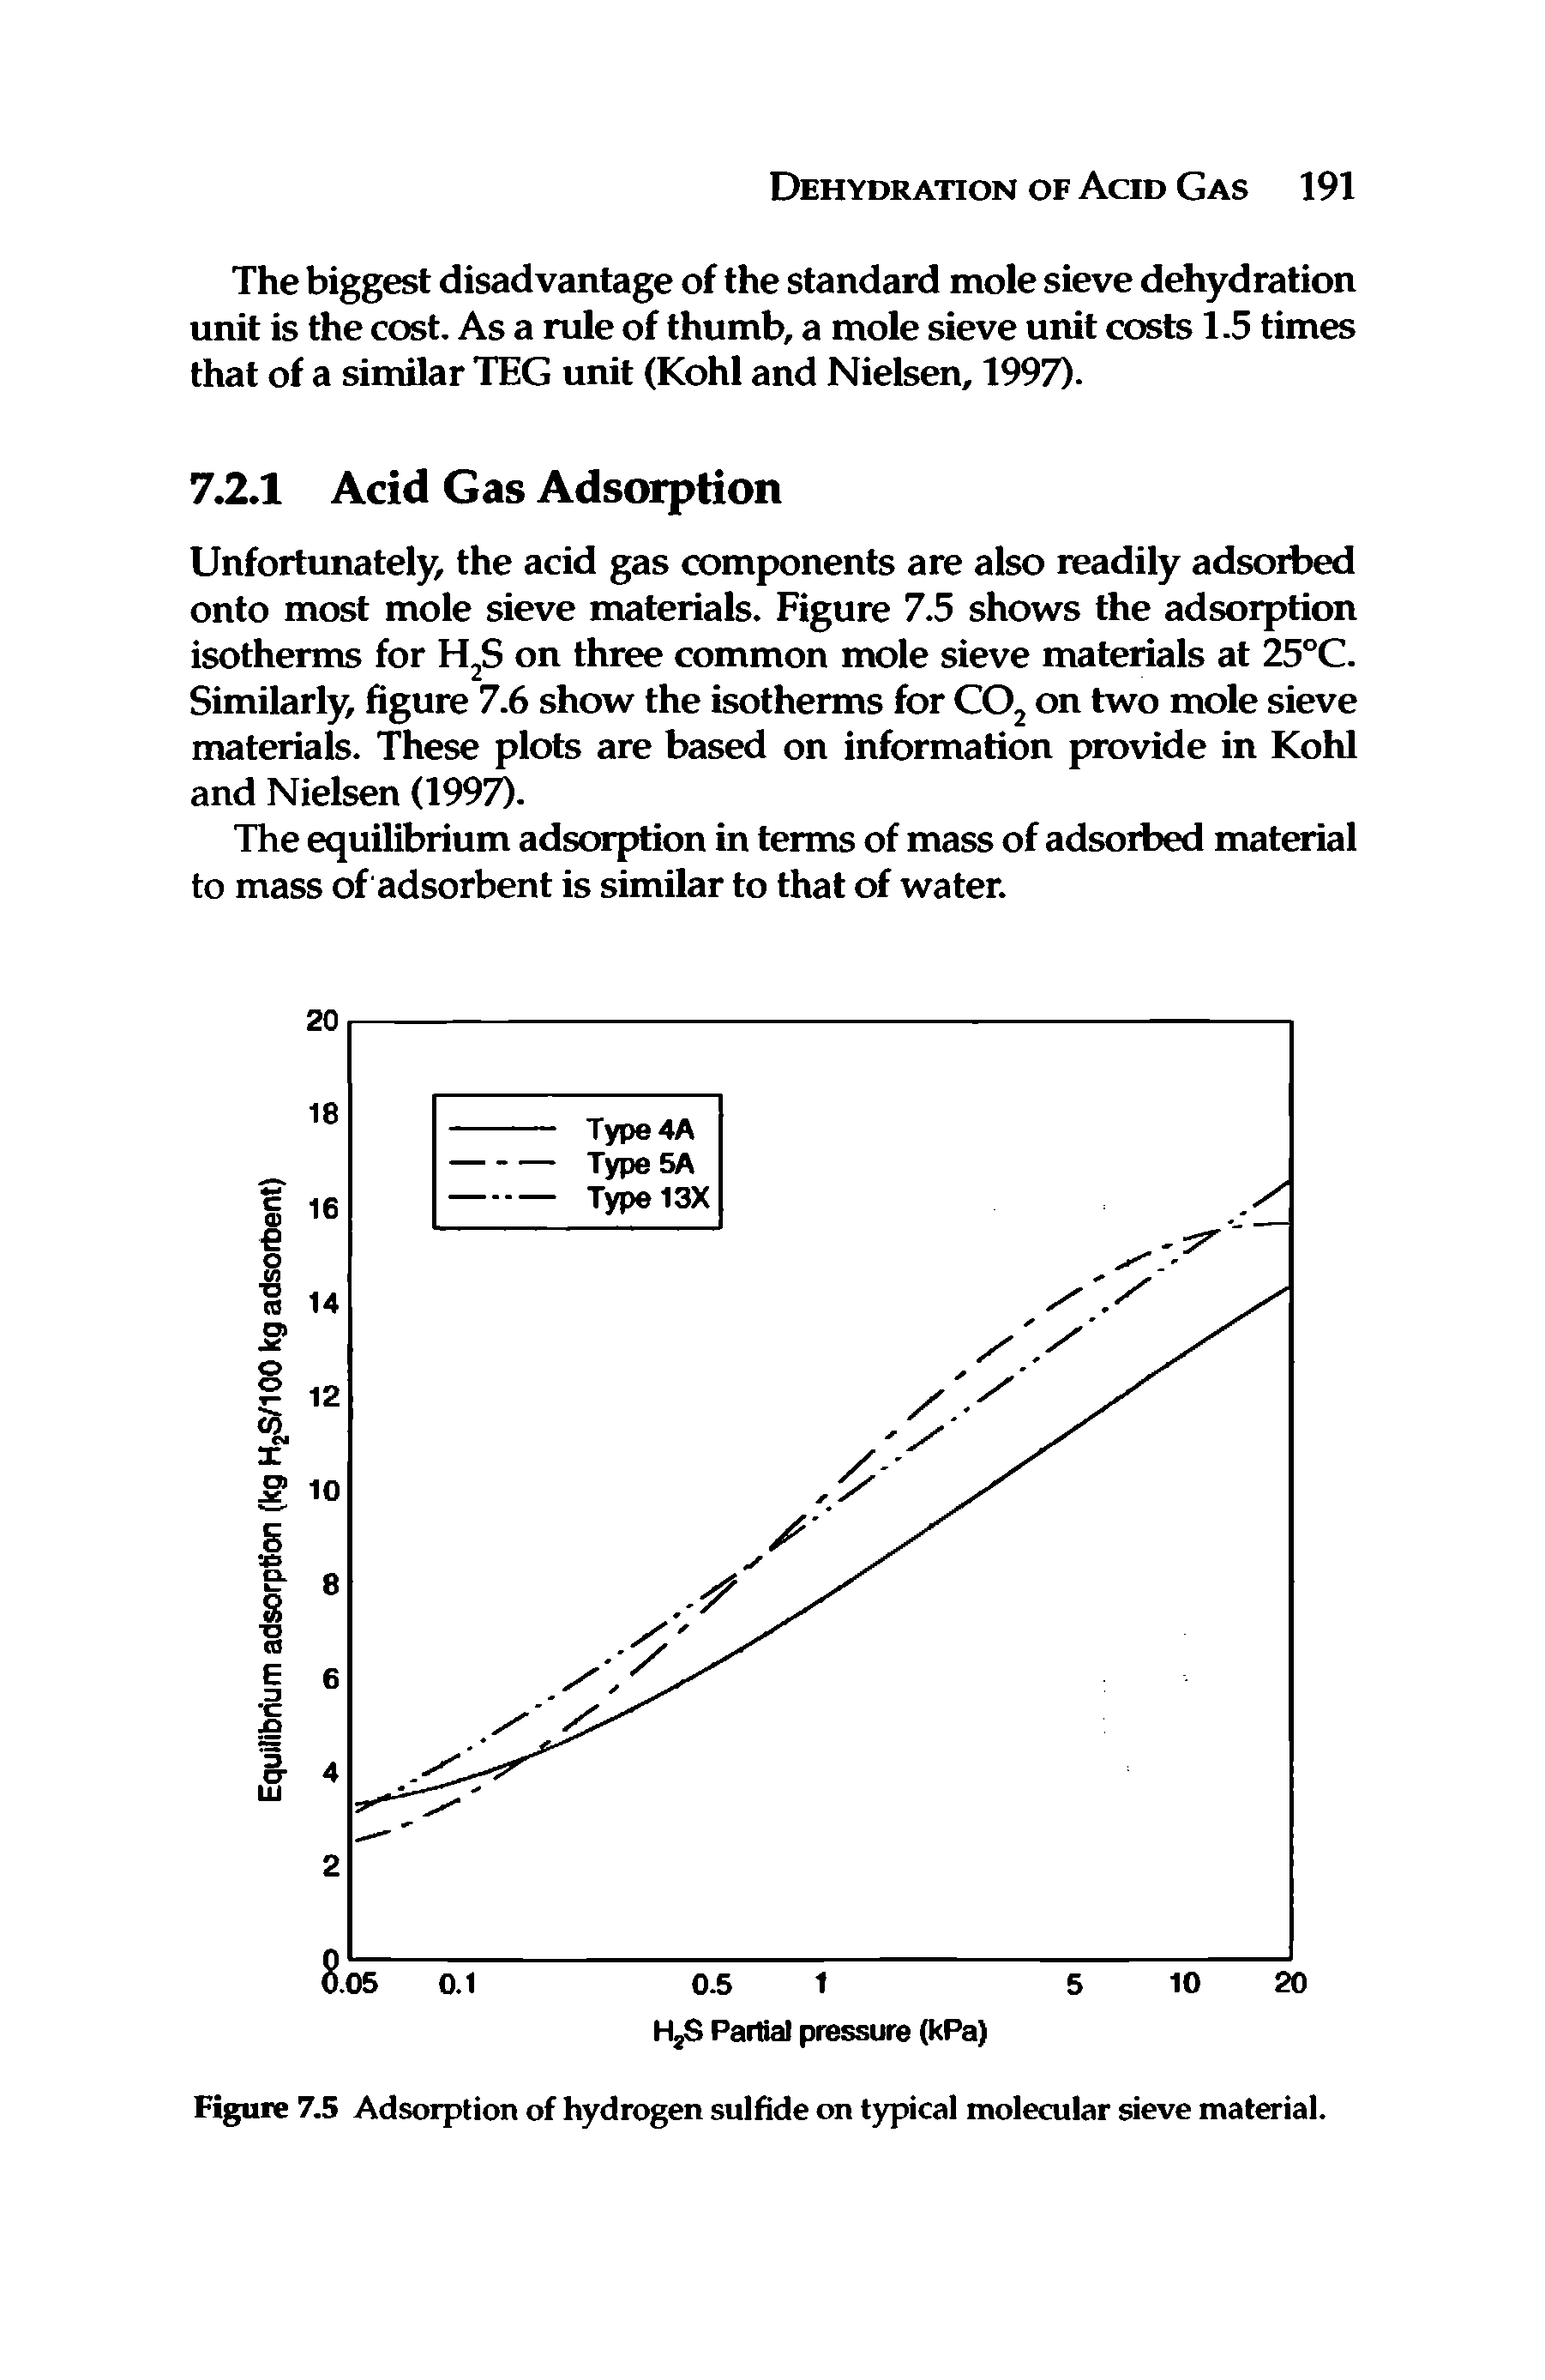 Figure 7.5 Adsorption of hydrogen sulfide on typical molecular sieve material.